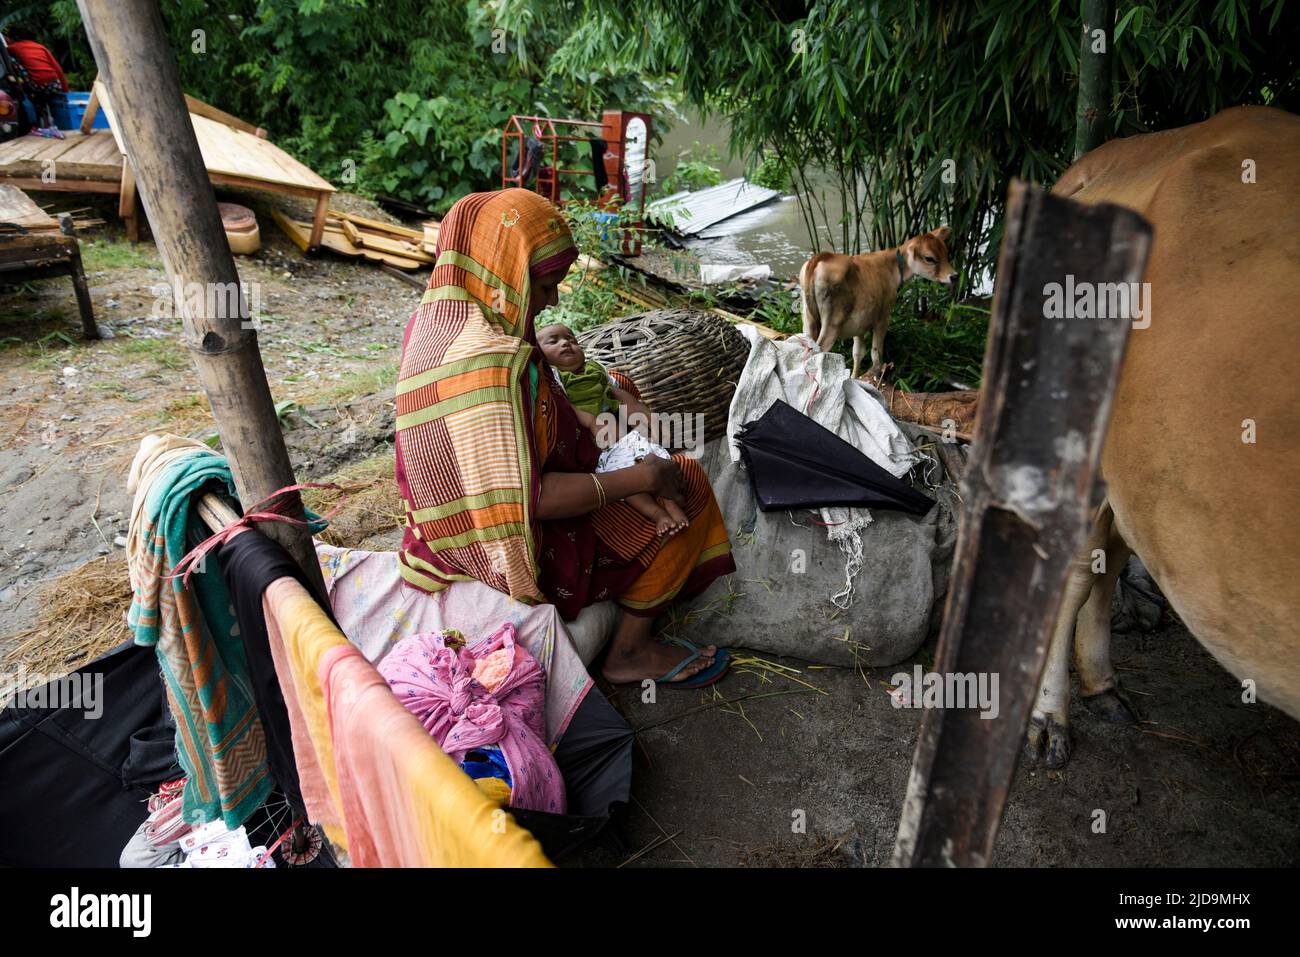 Flood affected woman with her child sitting in a makeshift shelter, at a village on June 17, 2022 in Barpeta, India. Assam flood situation deteriorates due to heavy rain, over a million people affected. Stock Photo